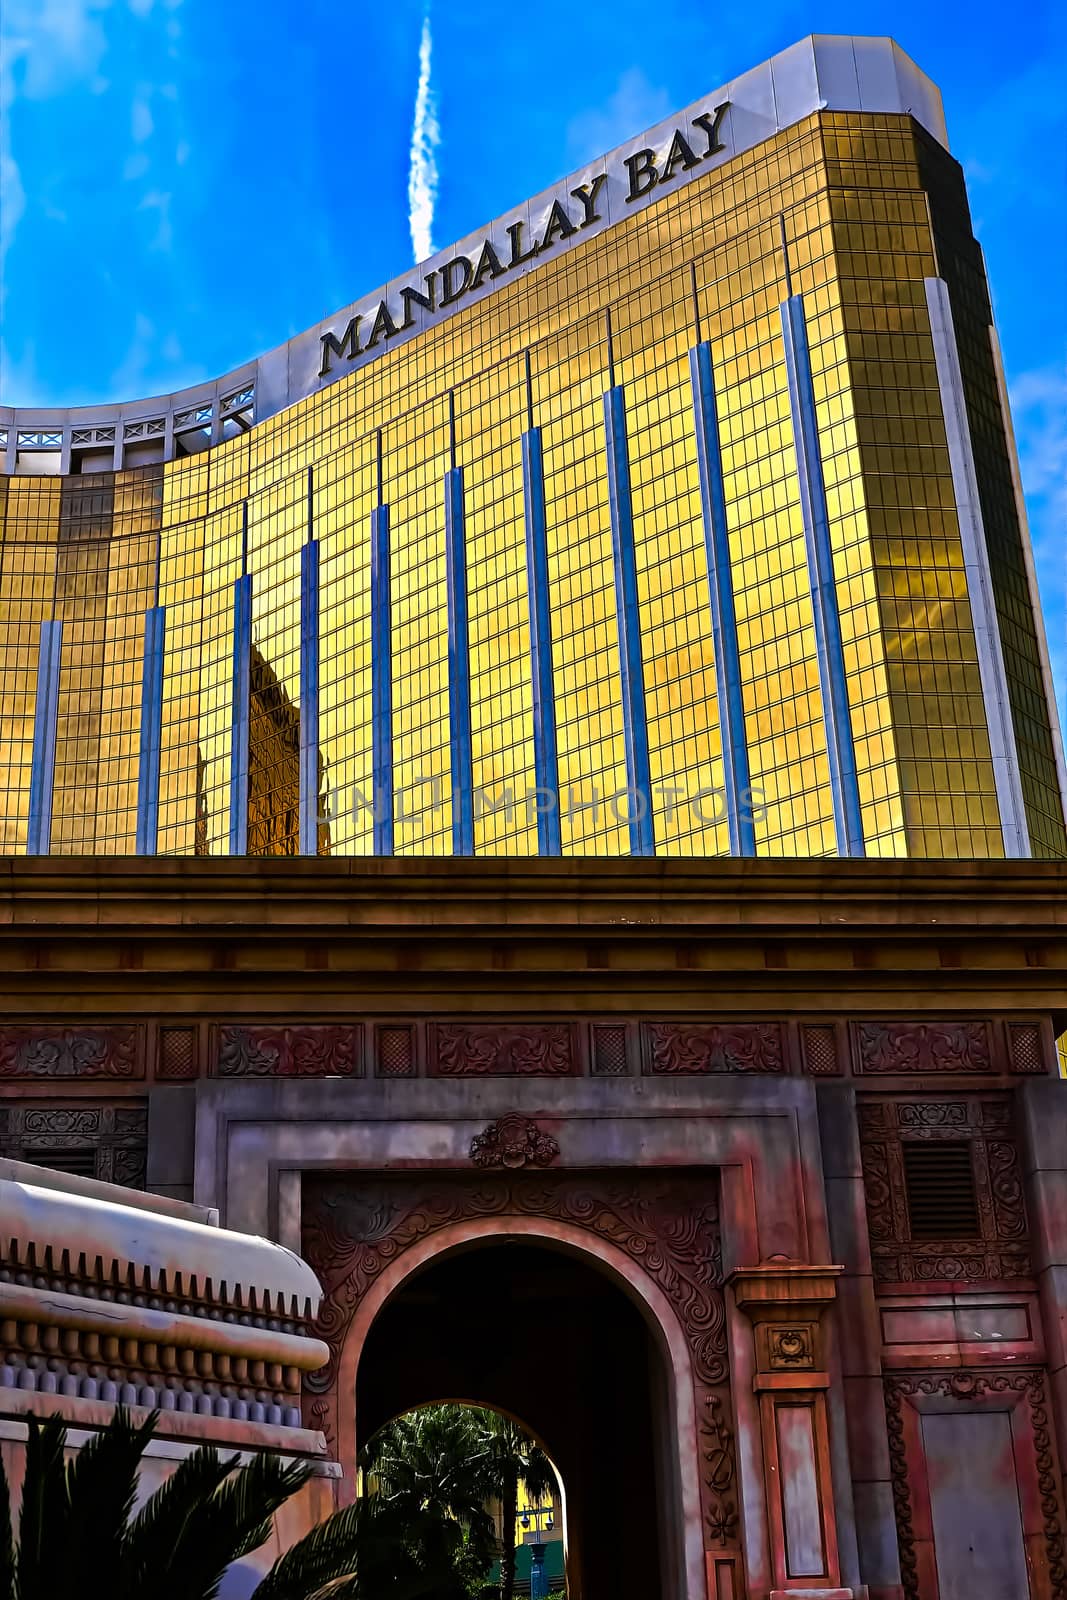 Las Vegas, NV/USA - Sep 15, 2018; Enormous Mandalay Bay Hotel Resort and Casino Las Vegas with beautifully landscaped entrance to modern architectural gold glass facade of building.